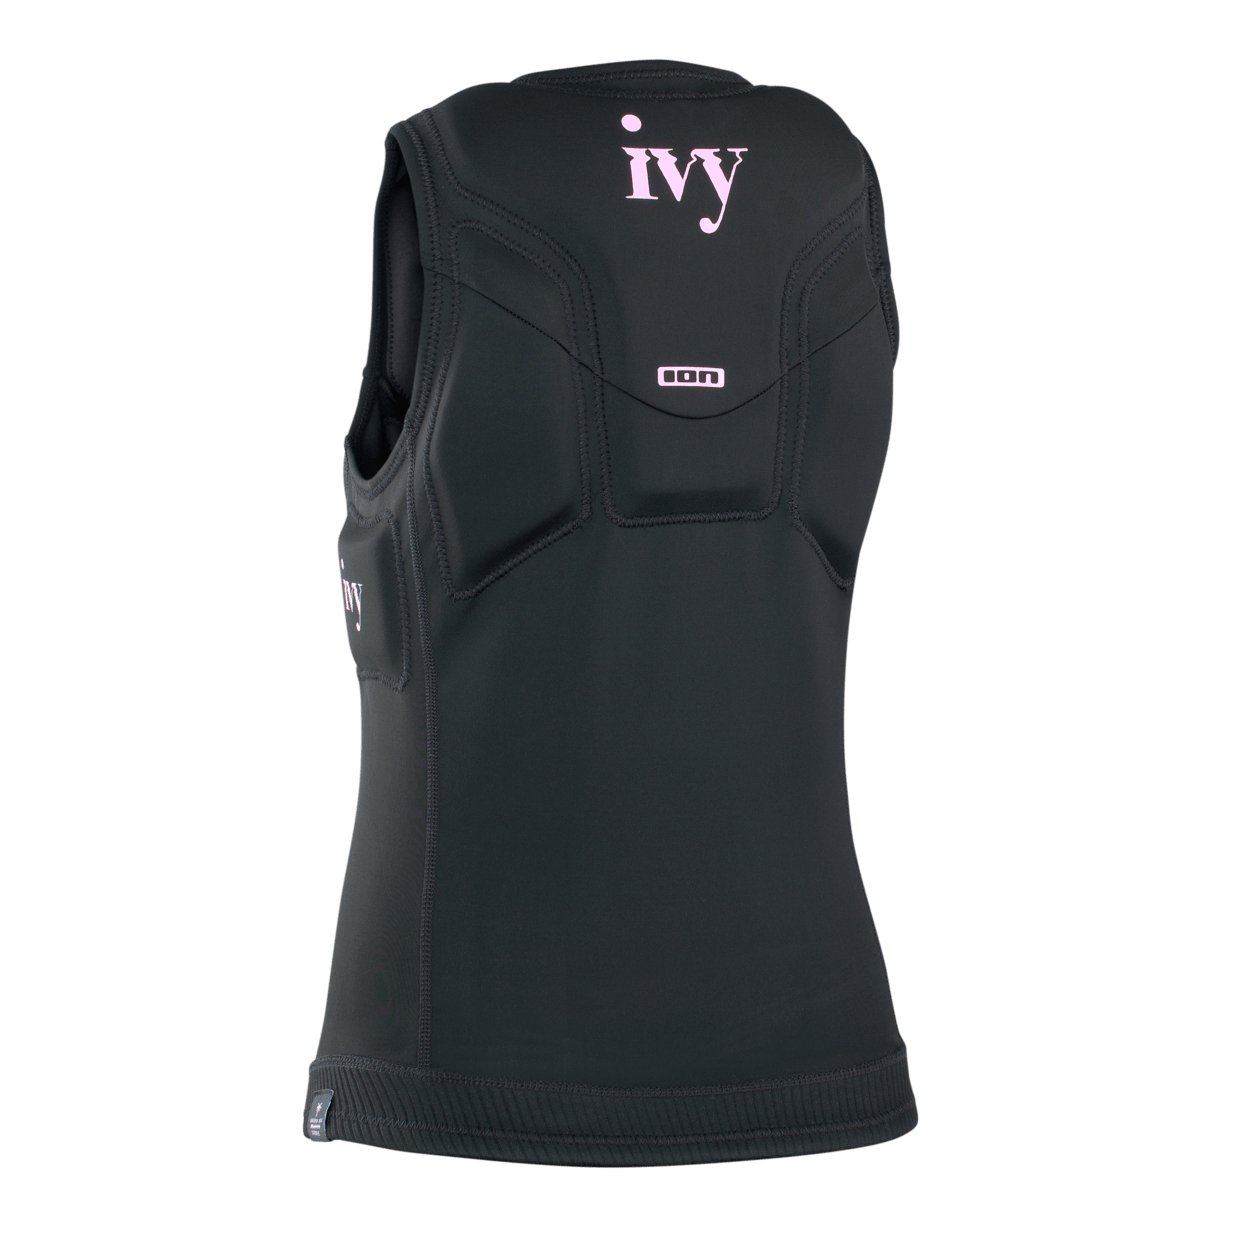 ION Ivy Vest Front Zip 2023 - Worthing Watersports - 9010583015644 - Protection - ION Water